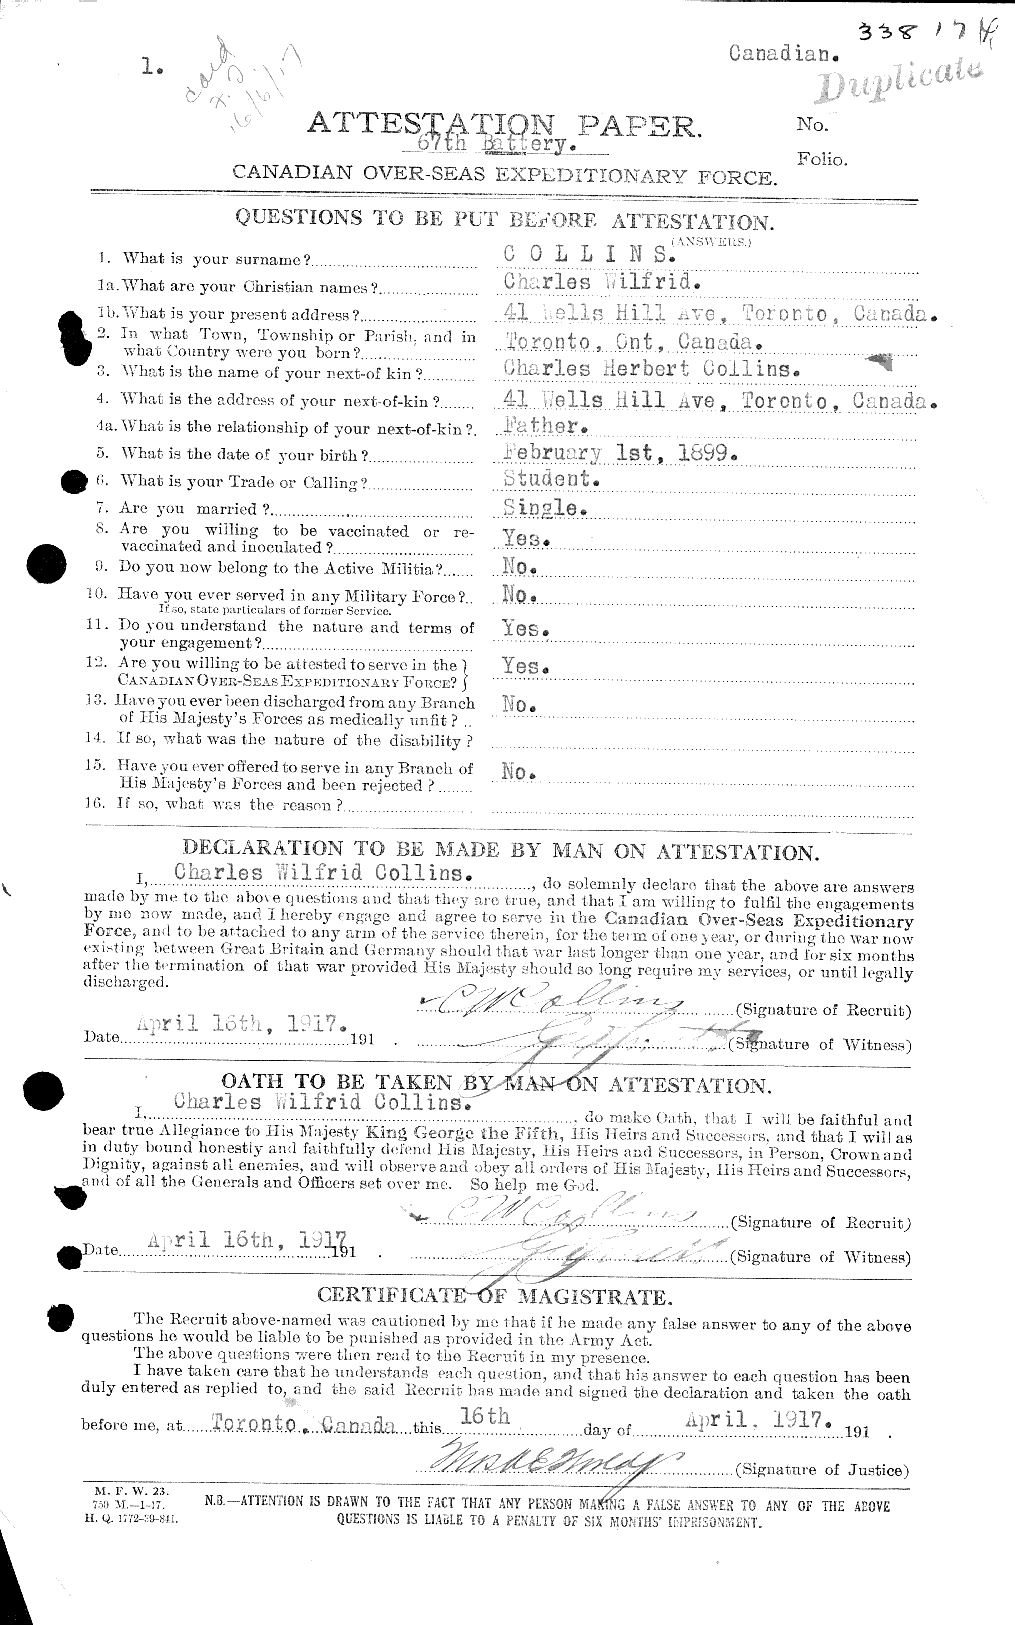 Personnel Records of the First World War - CEF 029044a